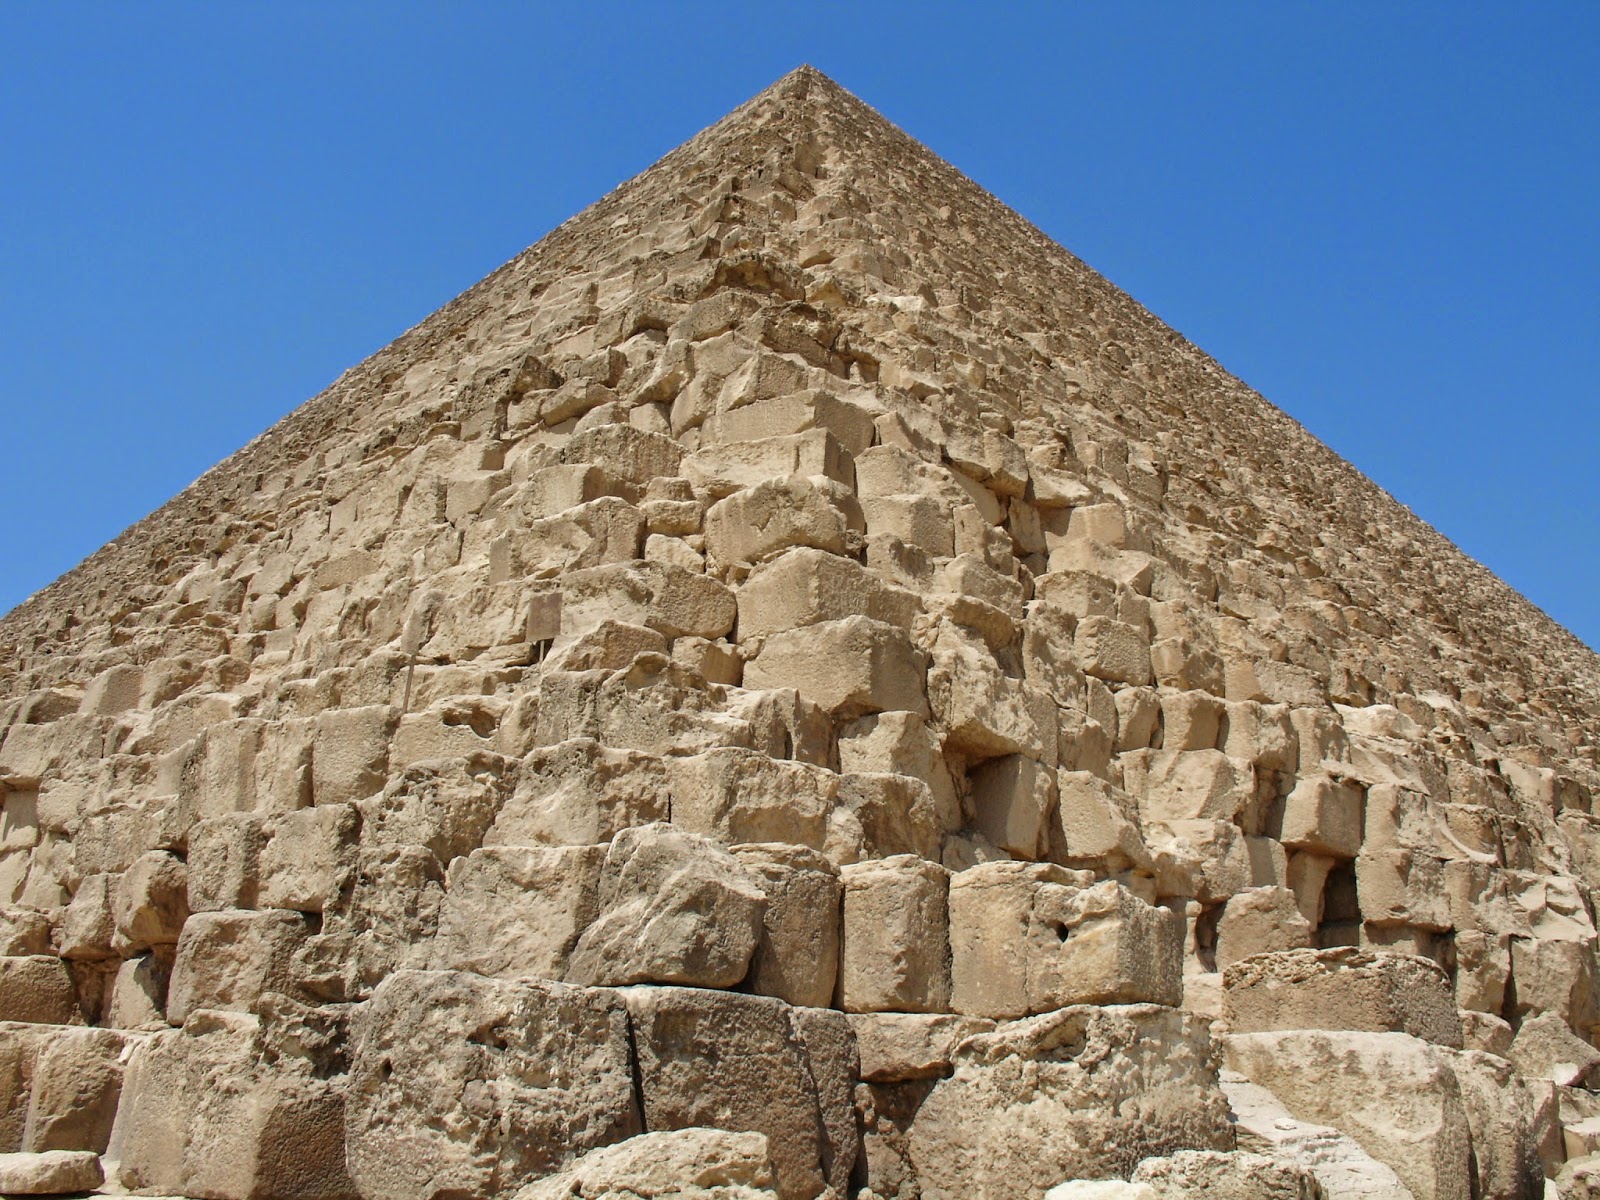 Egyptians moved pyramid stones over wet sand - The Archaeology News Network